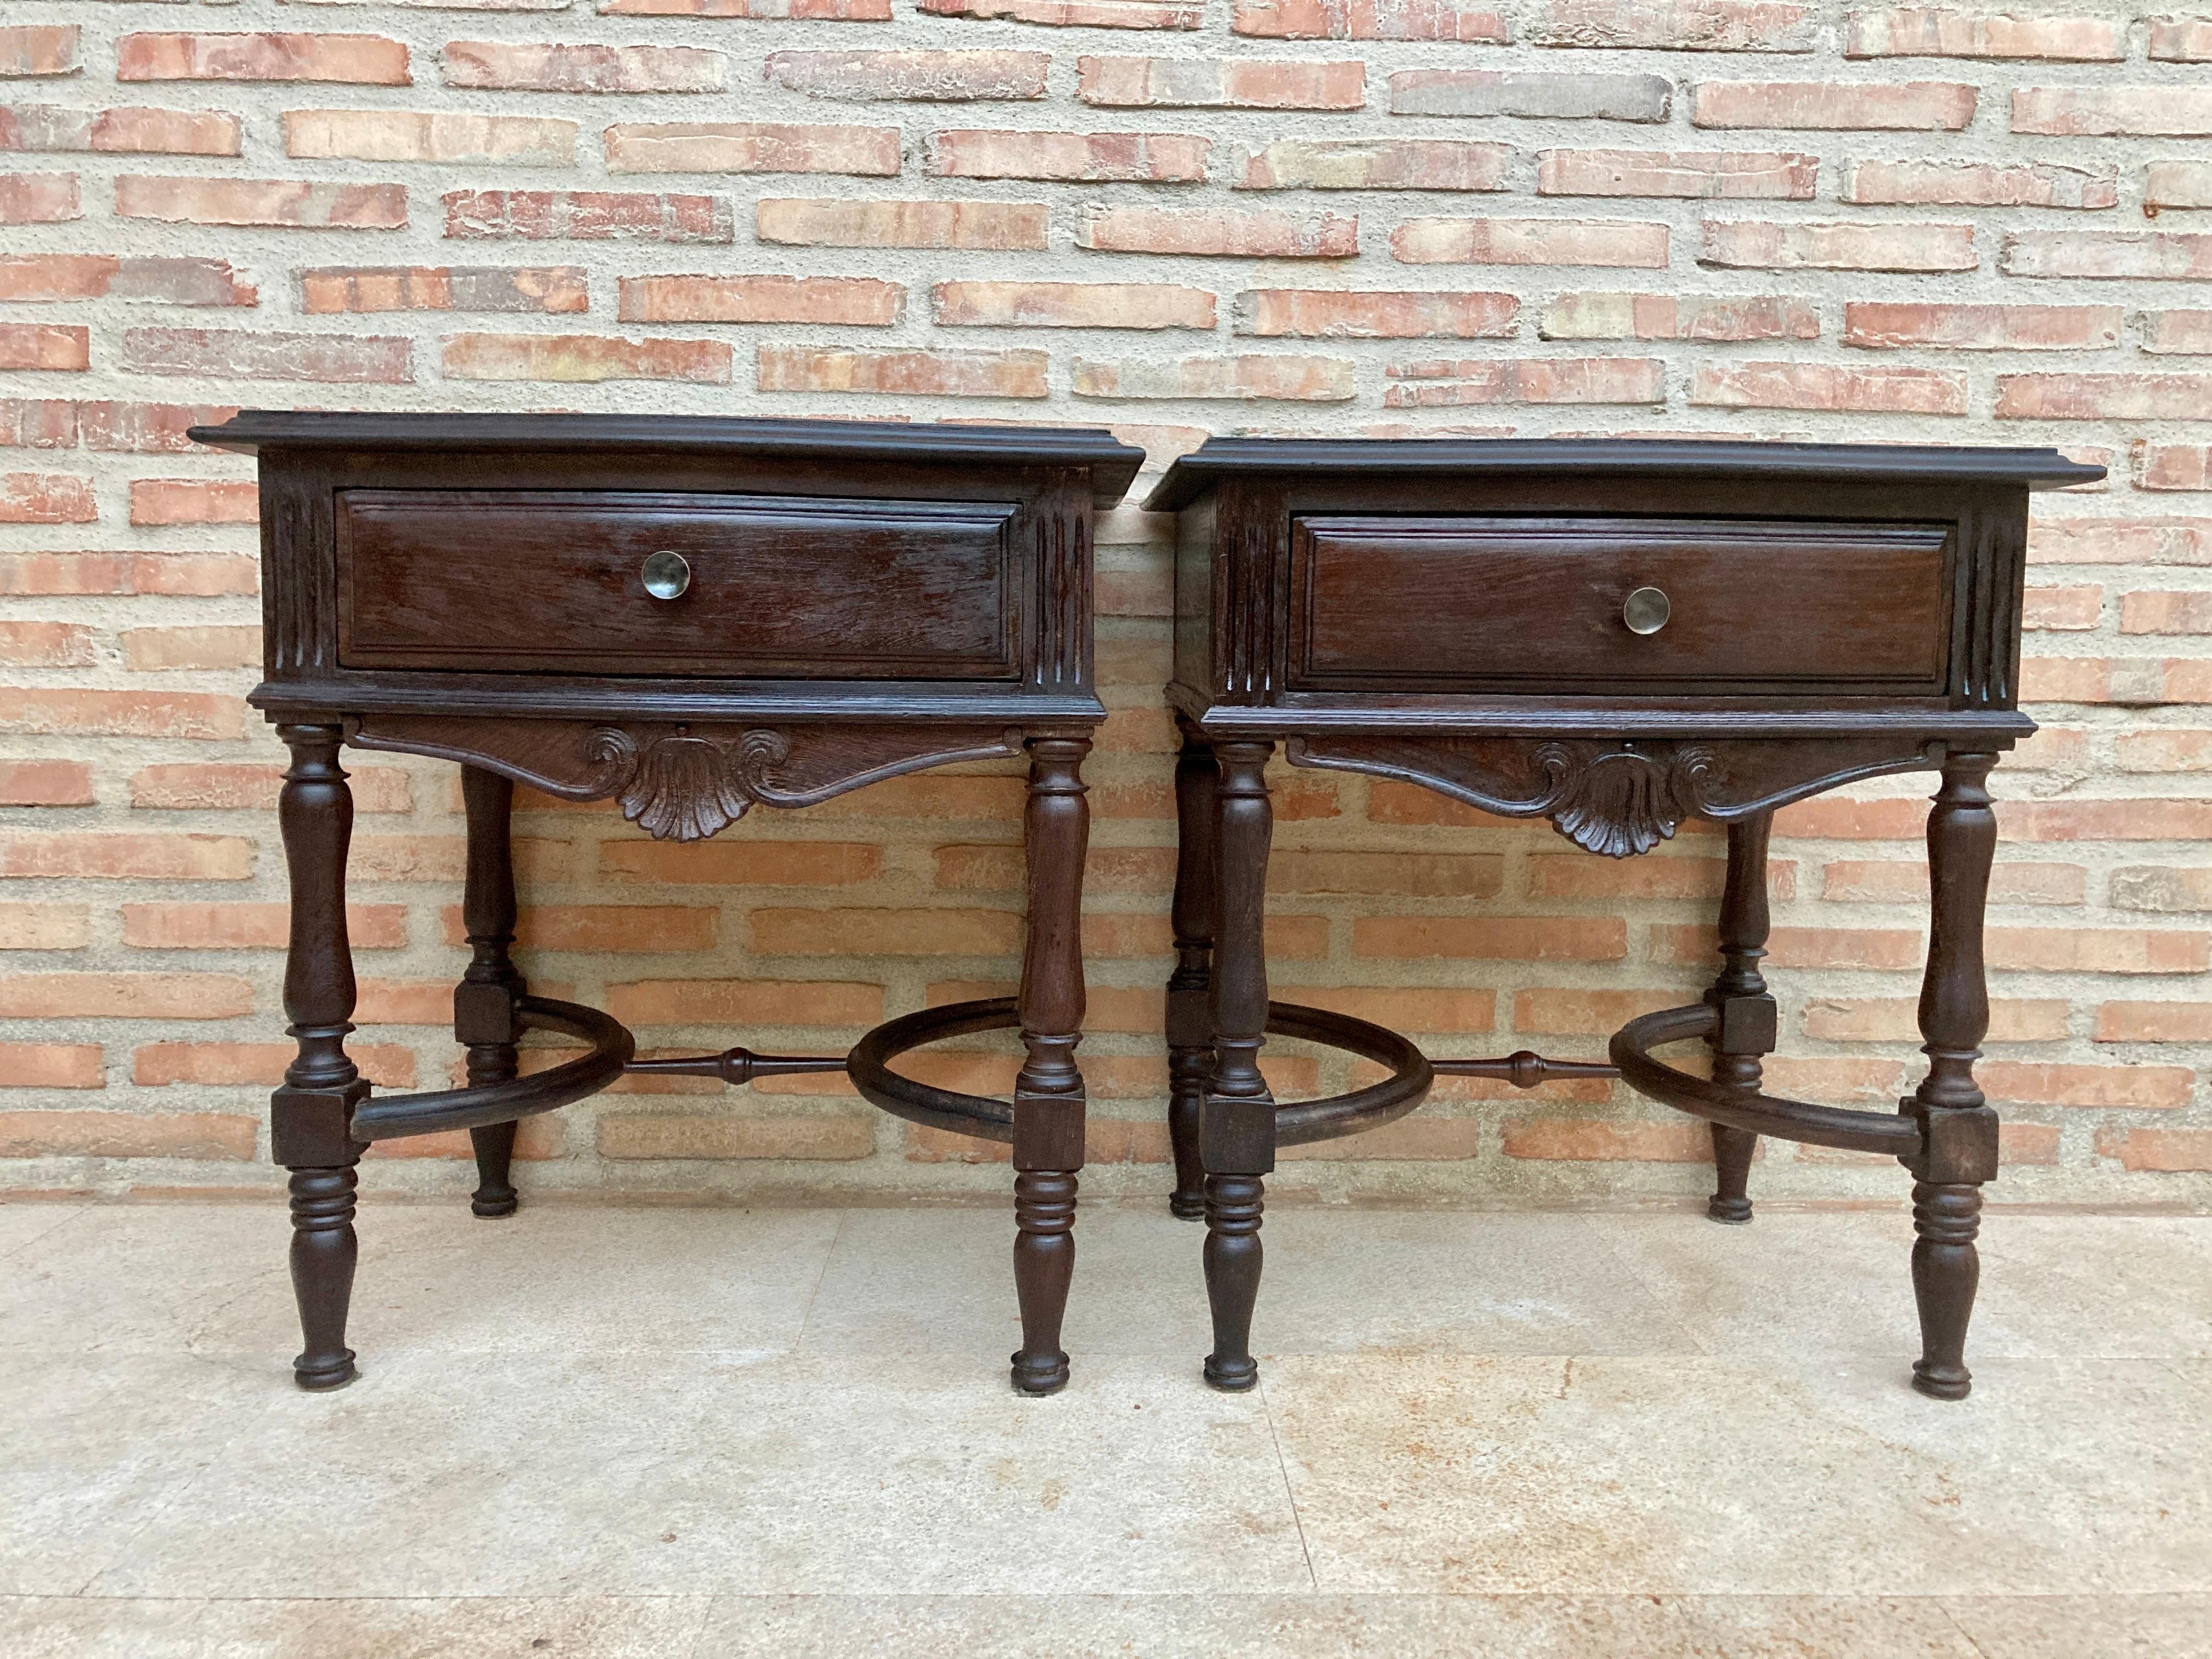 Pair of early 20th century Spanish chestnut nightstands or bedside tables with one drawer and metal hardware.
Beautiful very decorative bedside tables with a nice central joint that makes them different. 
They have a drawer lined inside with a